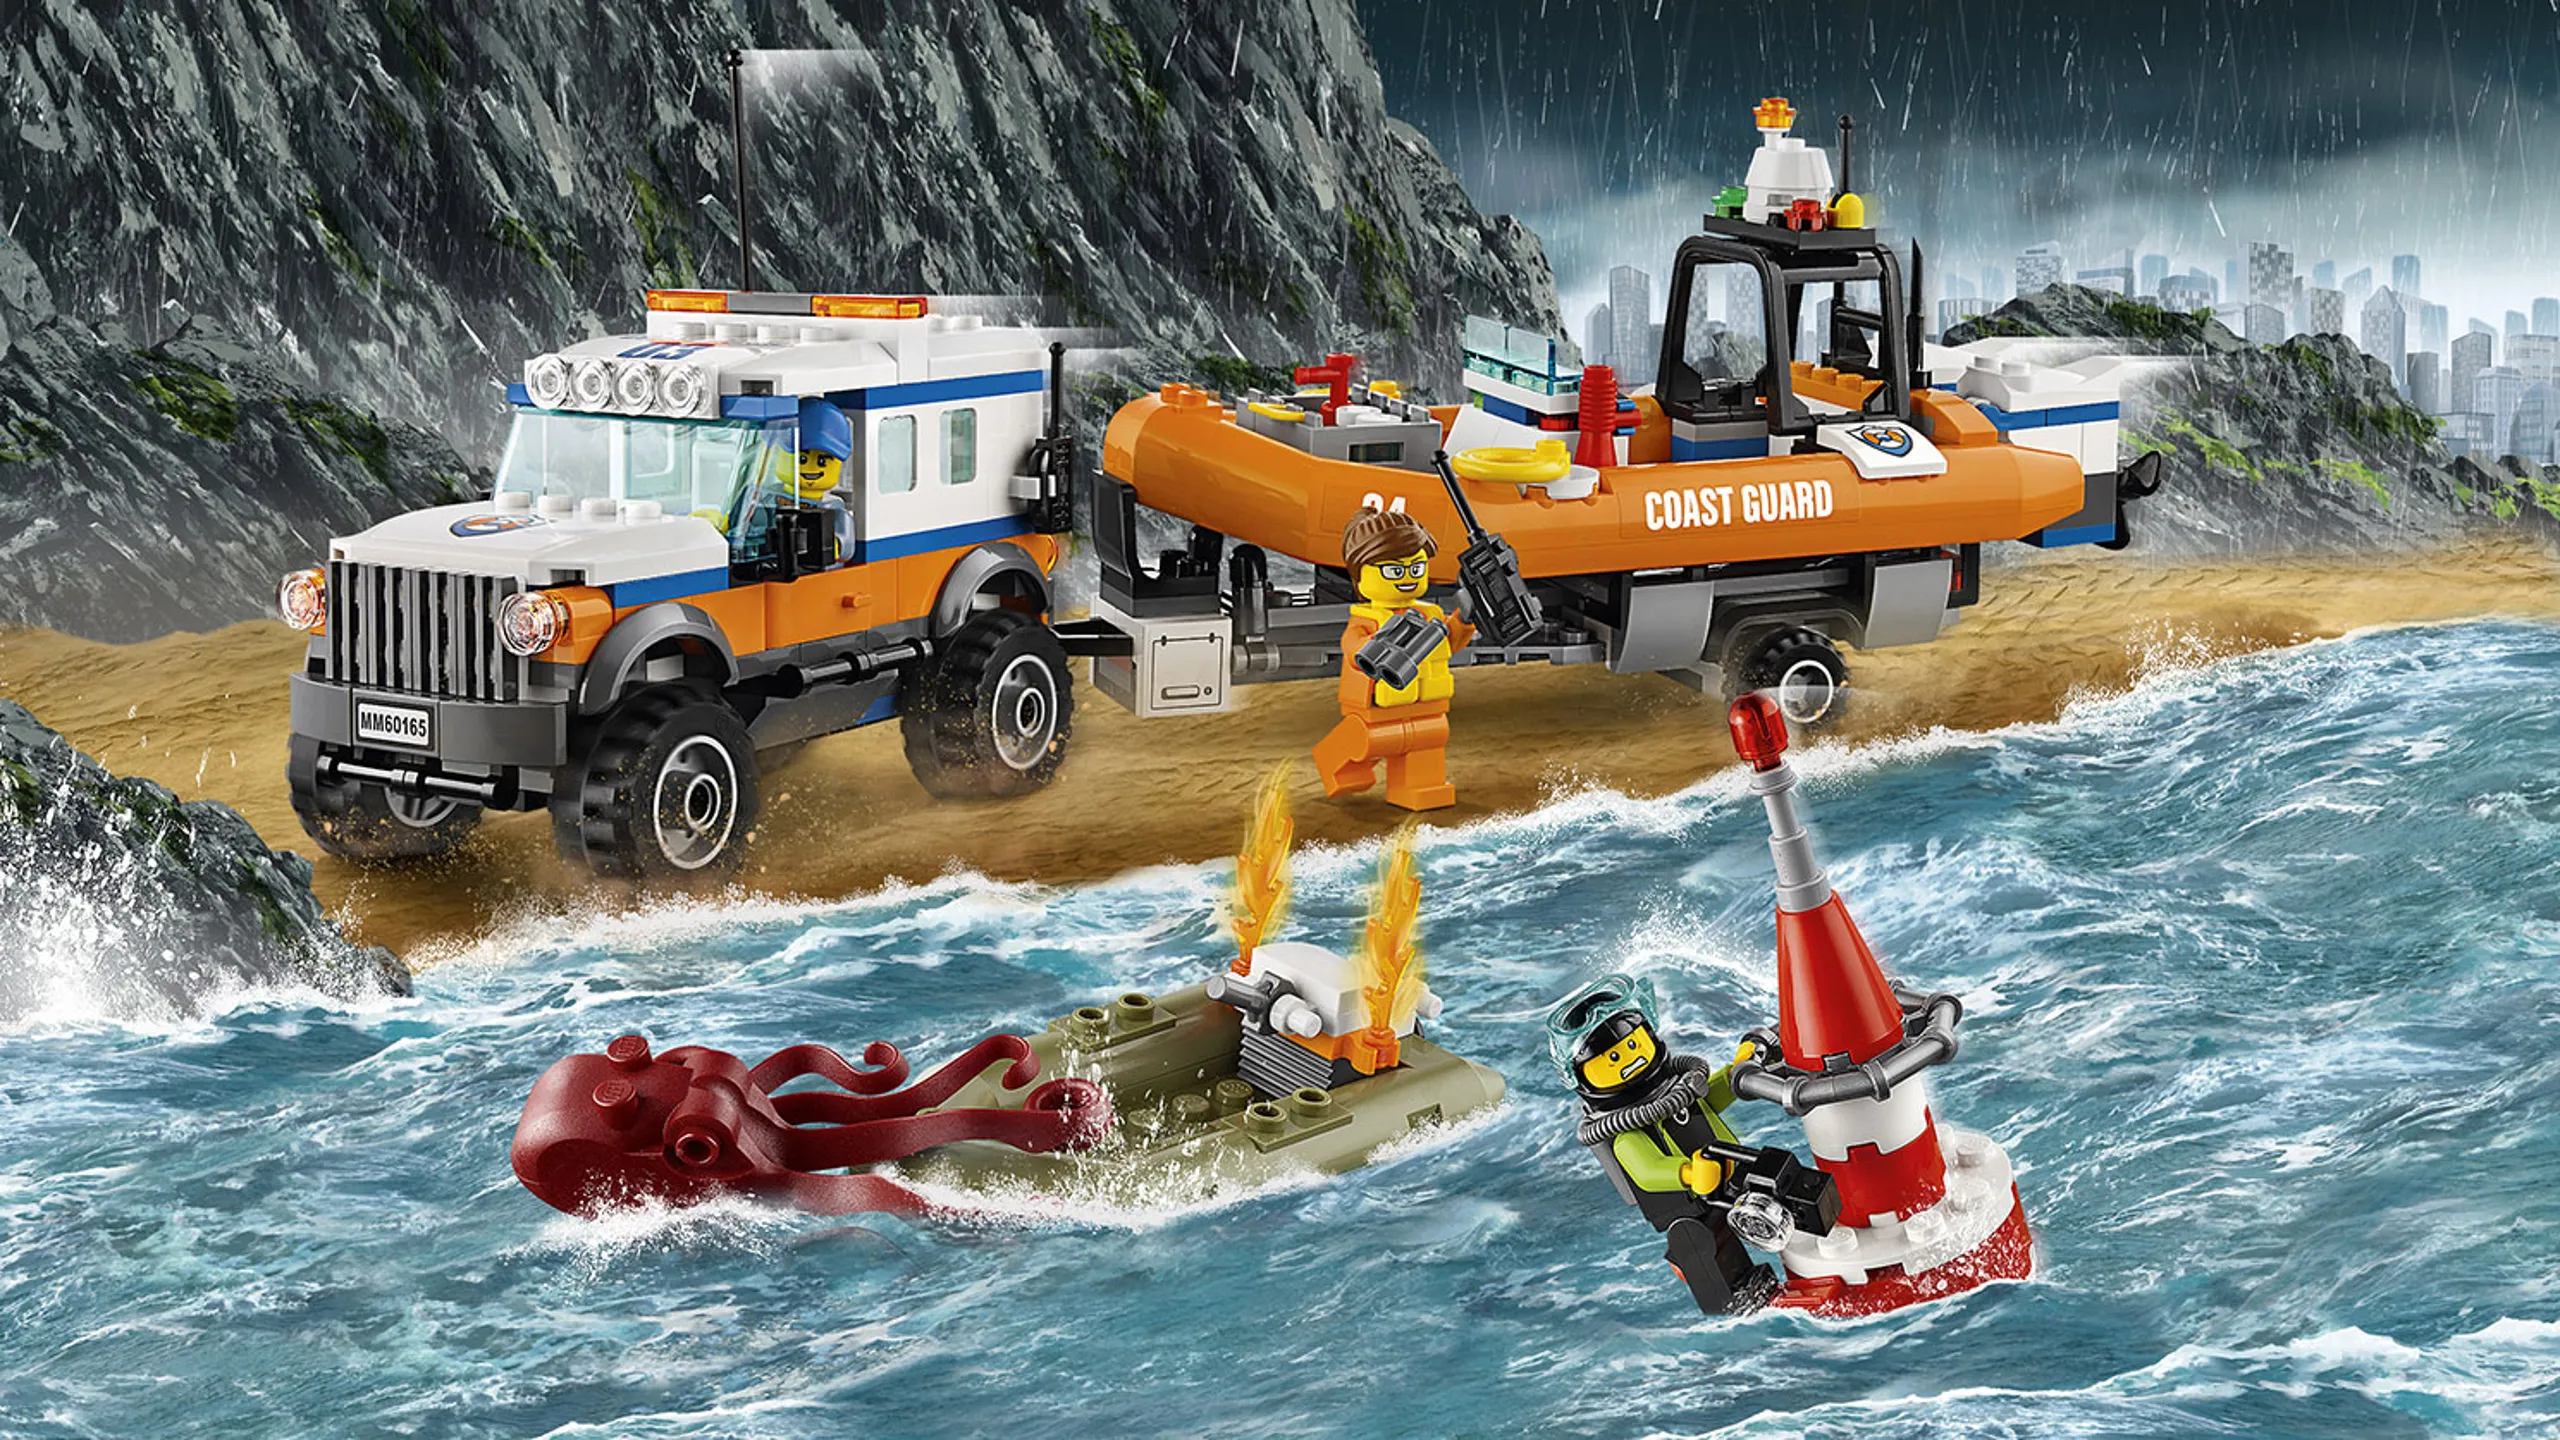 LEGO City Coast Guard - 60165 4x4 Response Unit - A giant octopus has attacked the divers speed boat and he is hanging on to a buoy. Now it's up to the coast guard to save him. 